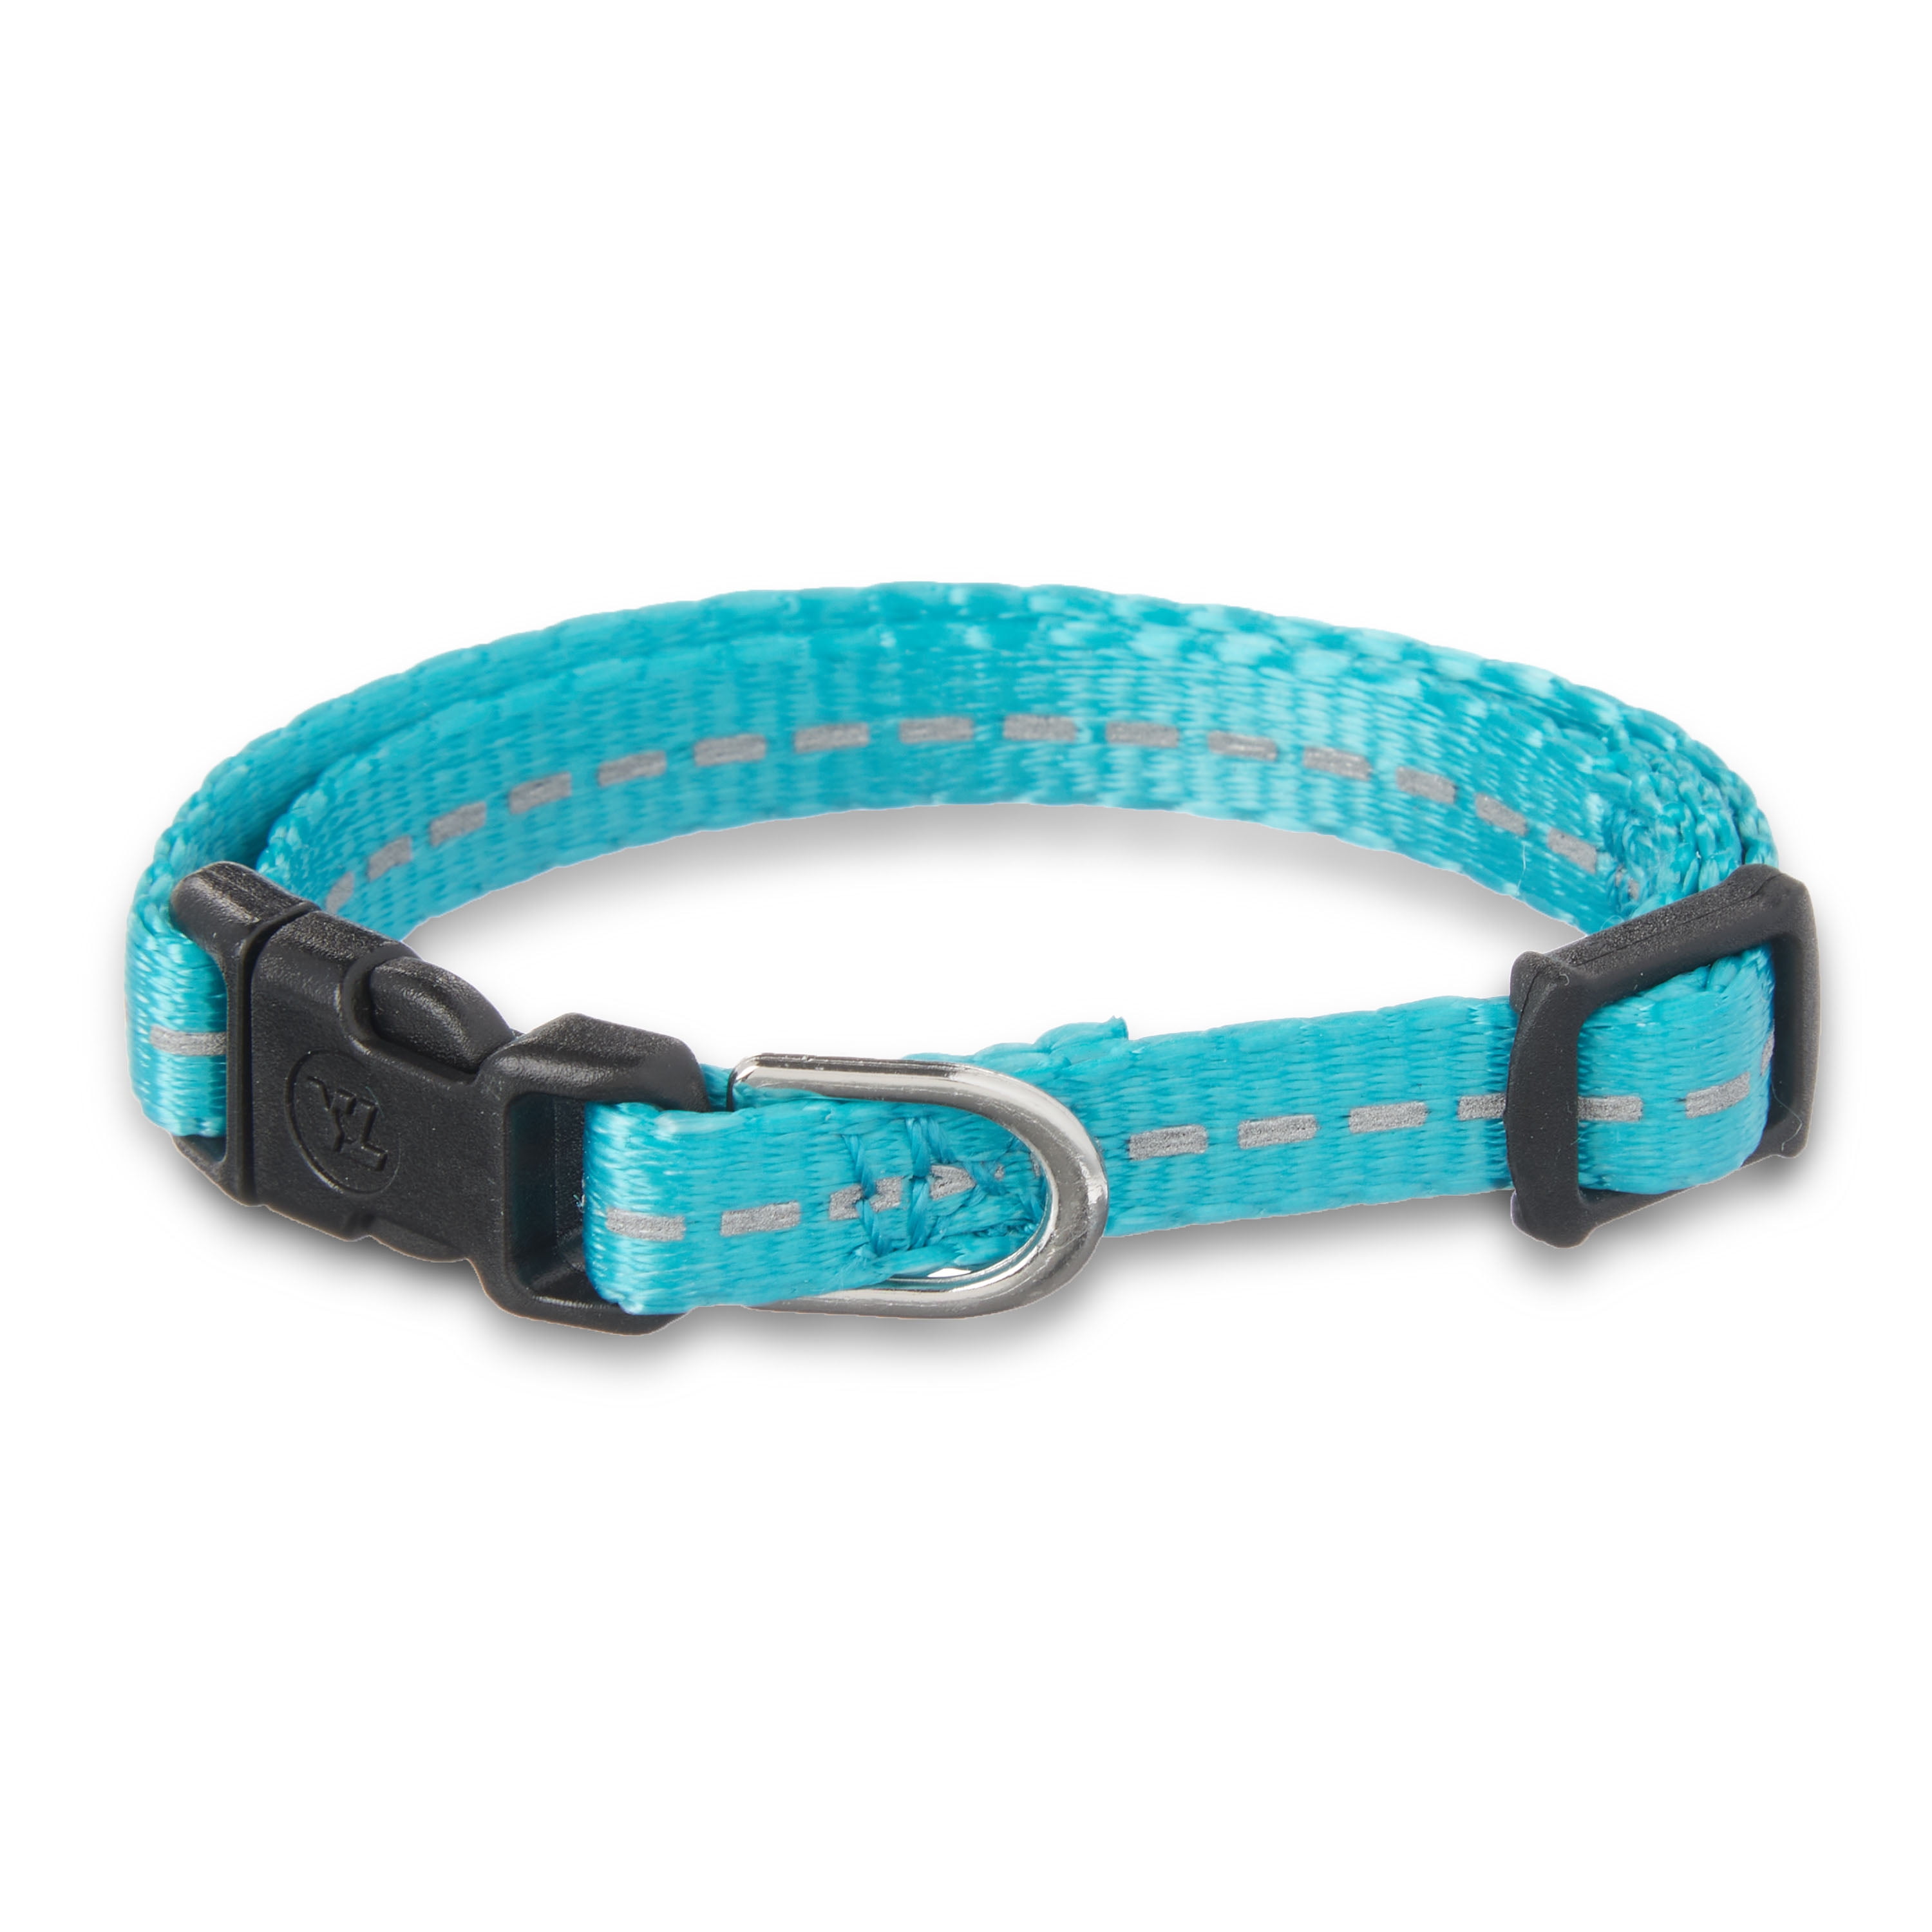 For Xtra Large Large Made in USA I Love Denmark Adjustable Small and Extra Small Dogs Medium Dog Collar